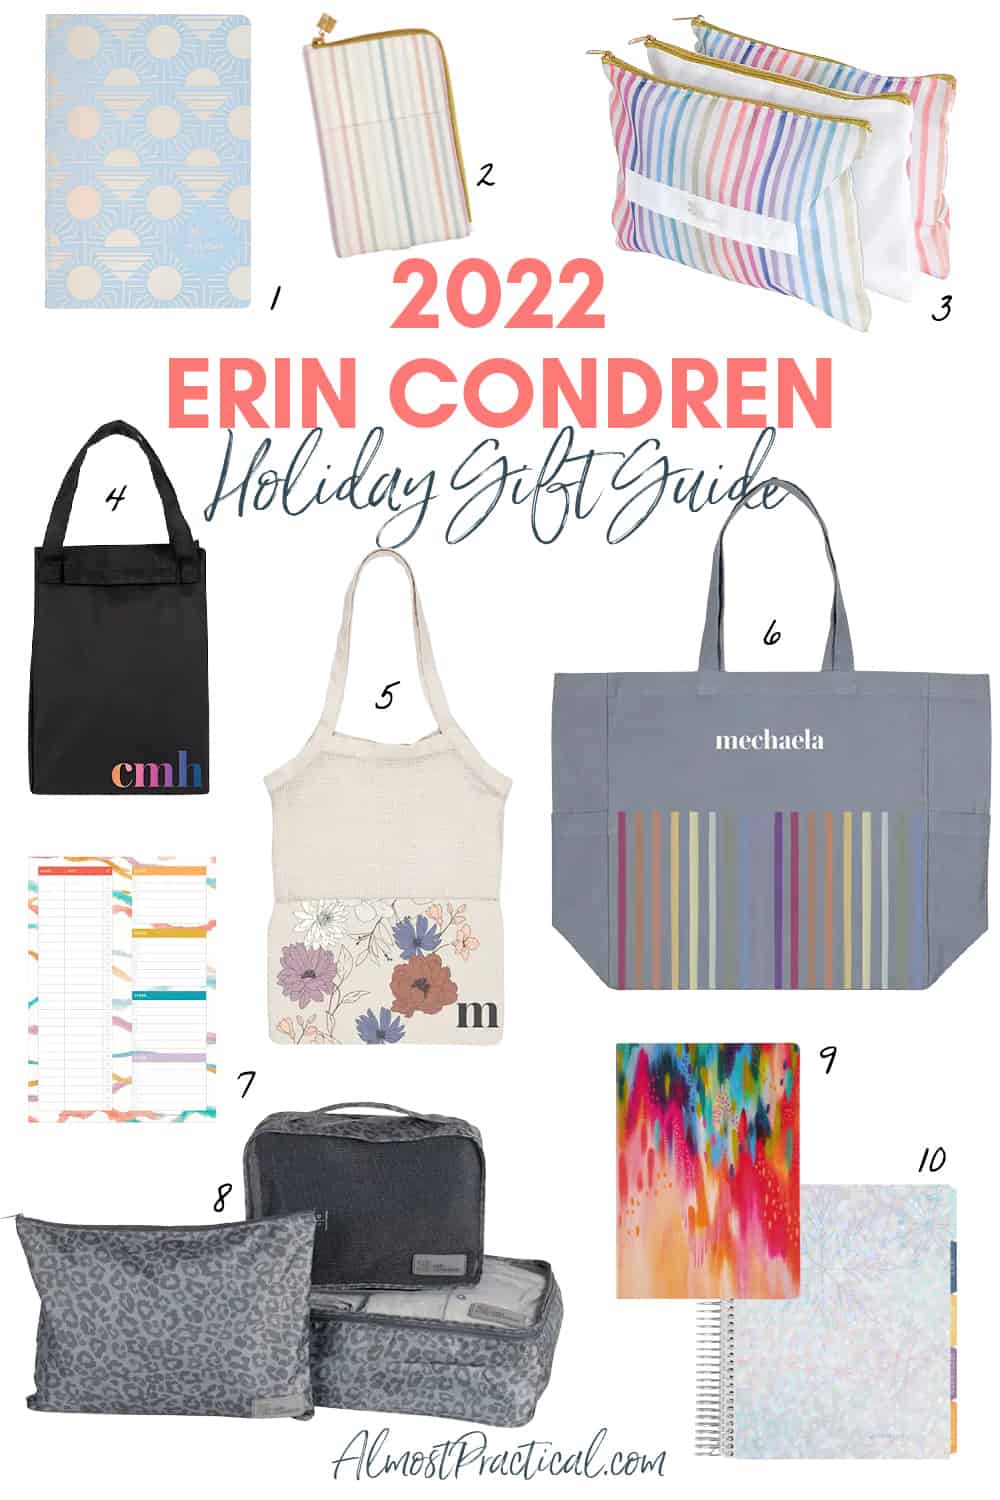 A collage of products from the Erin Condren 2022 Holiday Collection including planners, bags, and pouches.